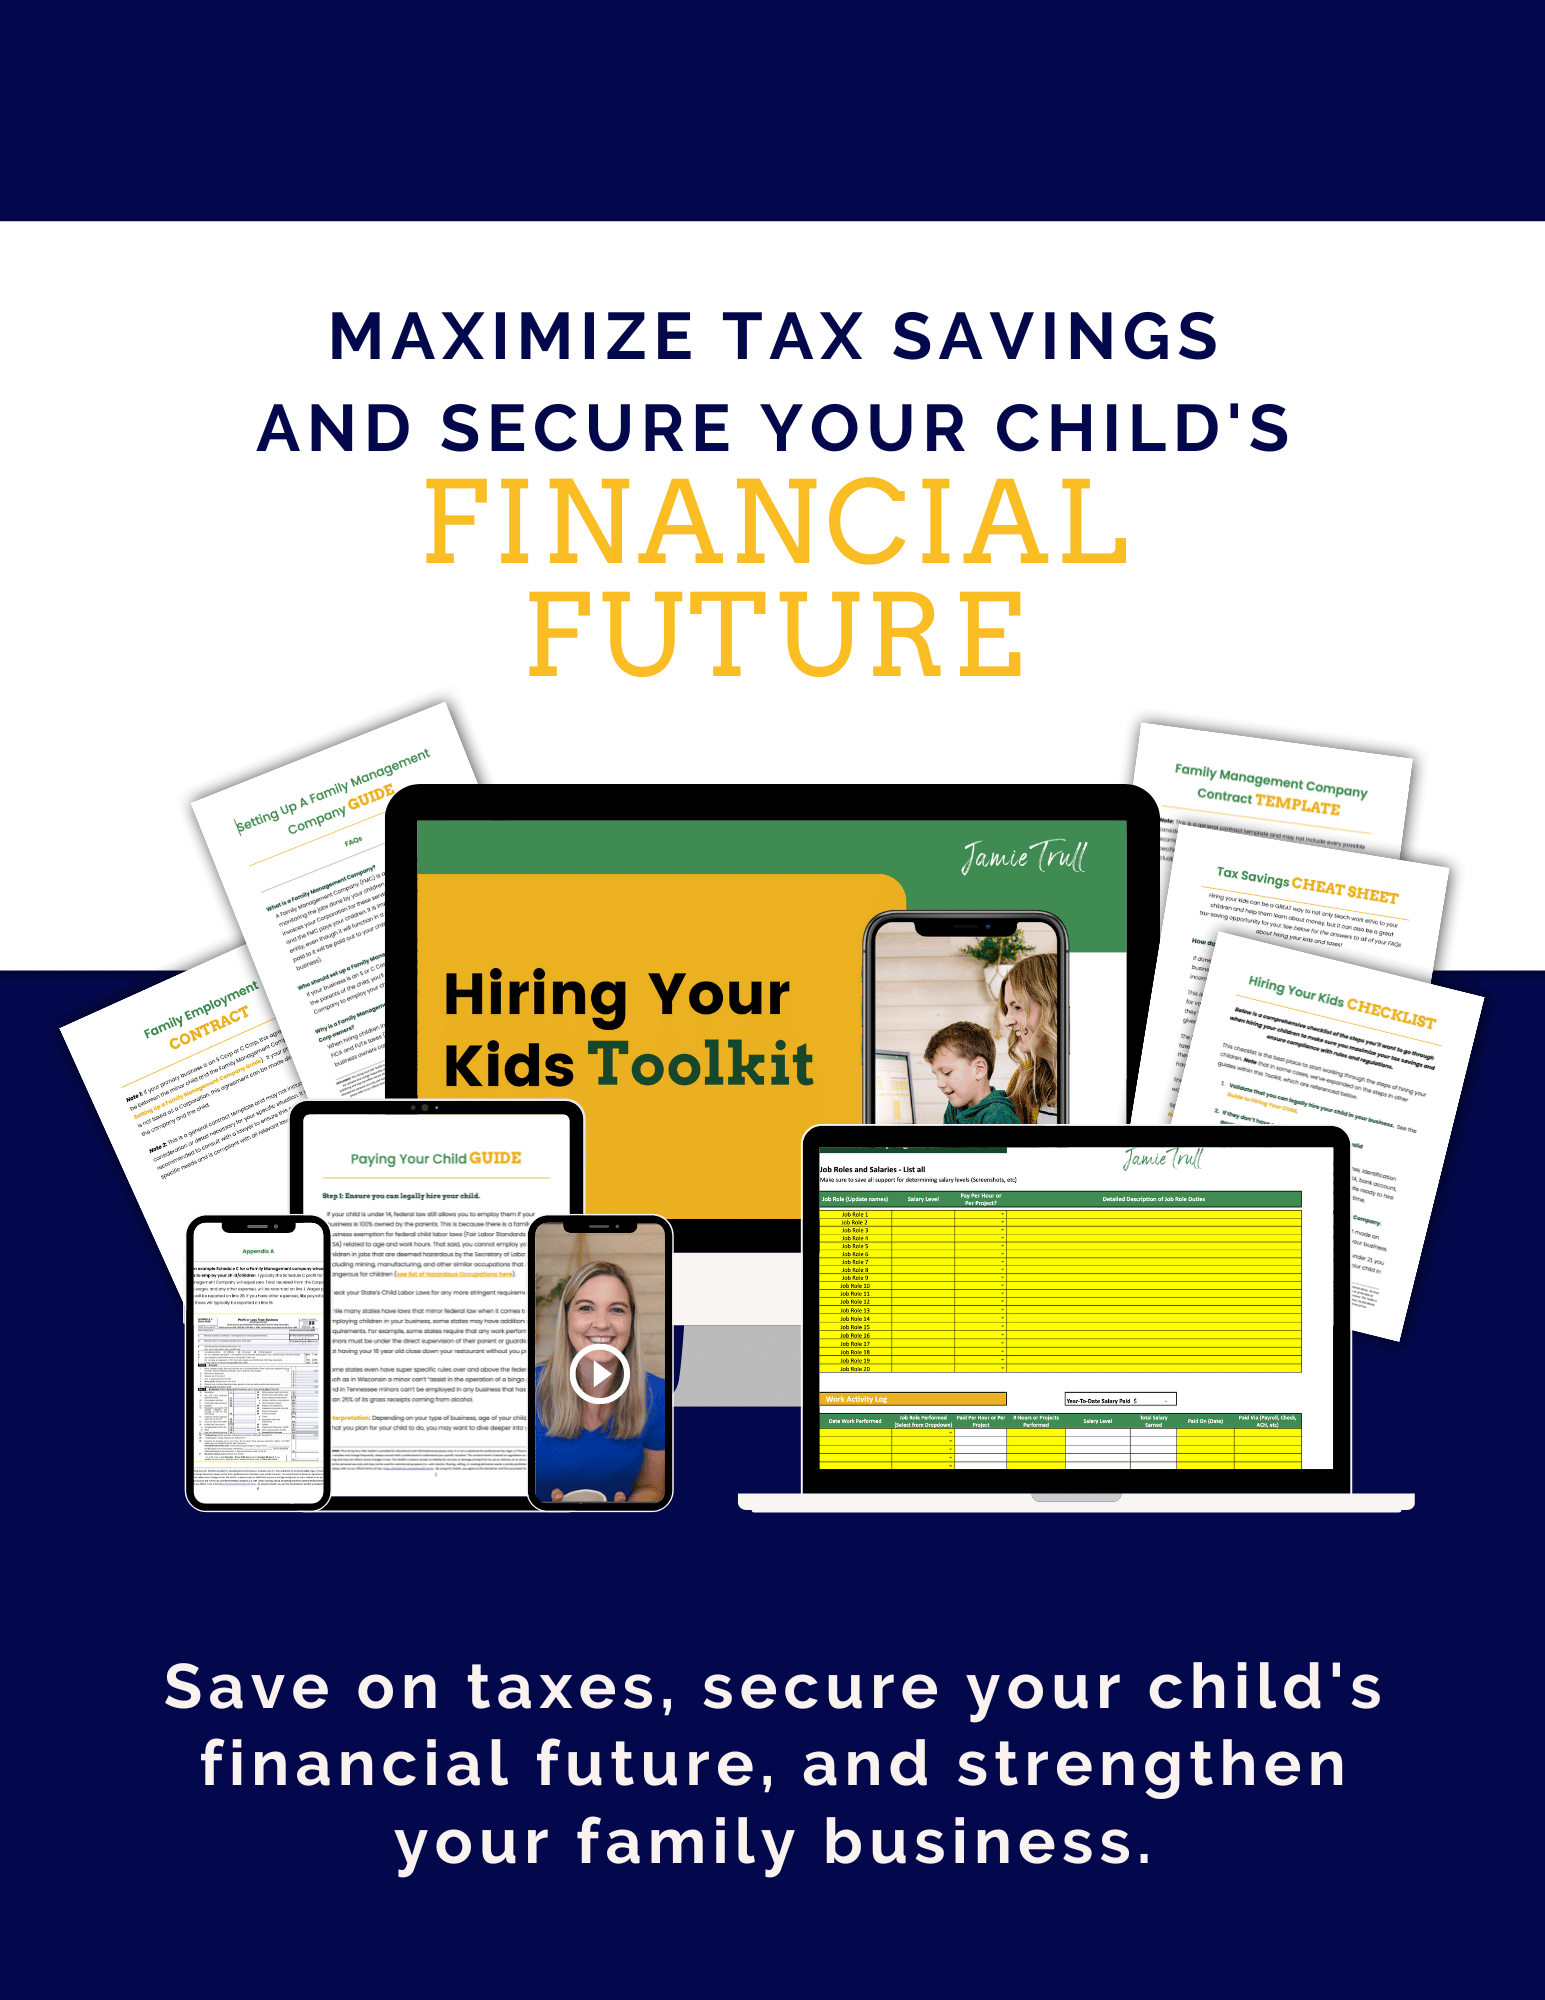 If you are hiring a family member and looking for a tax loophole, we have a smart and legal way for you to maximize tax savings and secure your child's financial future. Save on taxes, secure your child's financial future, and strengthen your family business.